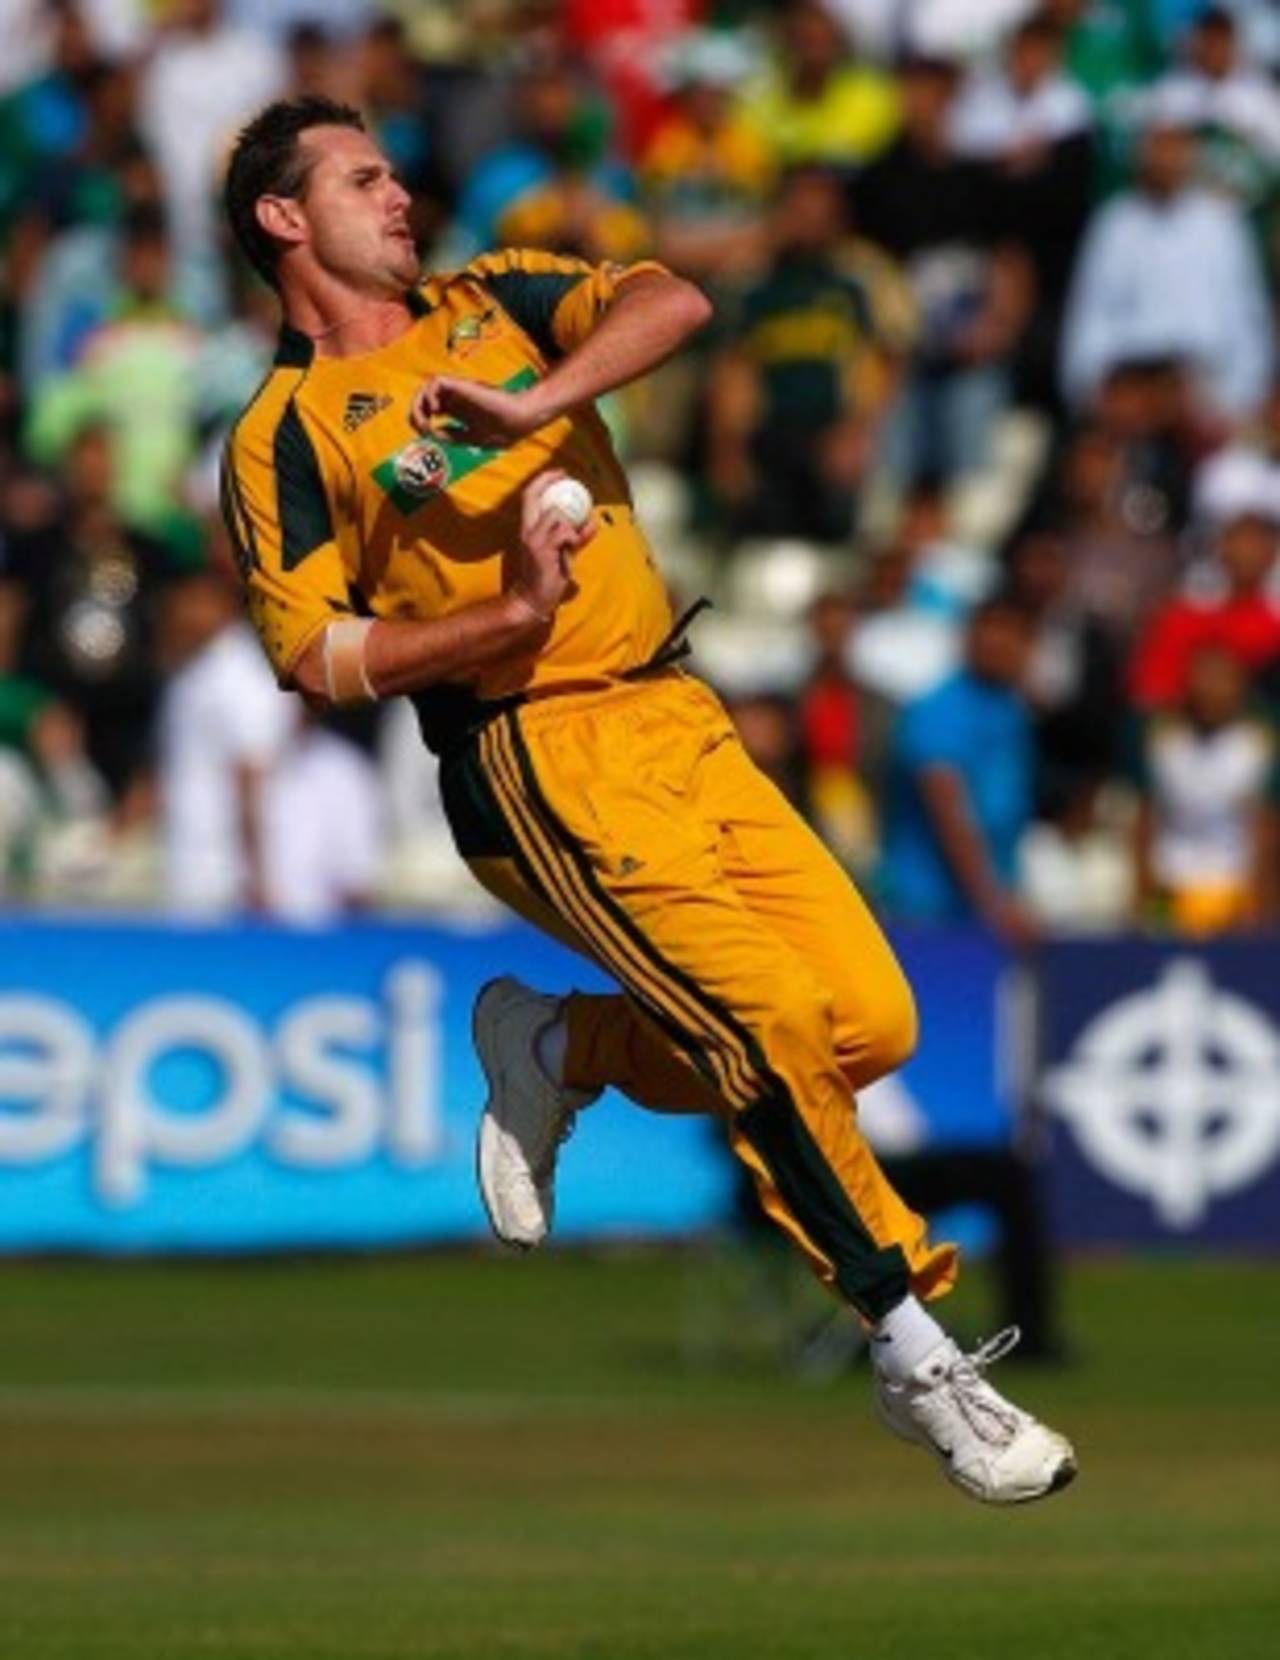 Shaun Tait will only play for Australia in green and gold clothes&nbsp;&nbsp;&bull;&nbsp;&nbsp;Getty Images